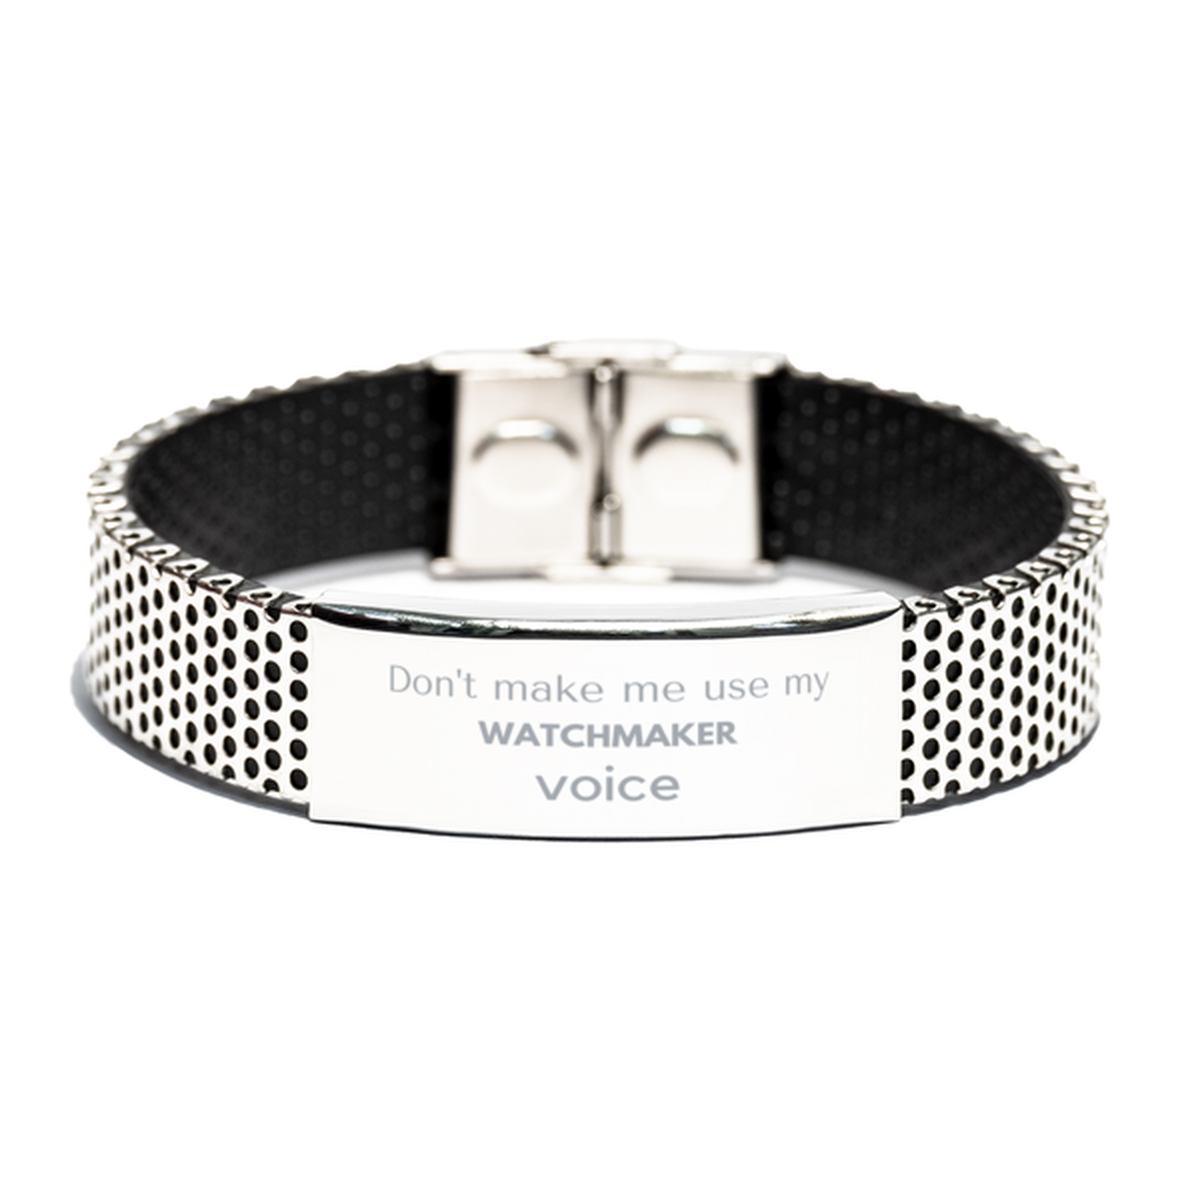 Don't make me use my Watchmaker voice, Sarcasm Watchmaker Gifts, Christmas Watchmaker Stainless Steel Bracelet Birthday Unique Gifts For Watchmaker Coworkers, Men, Women, Colleague, Friends